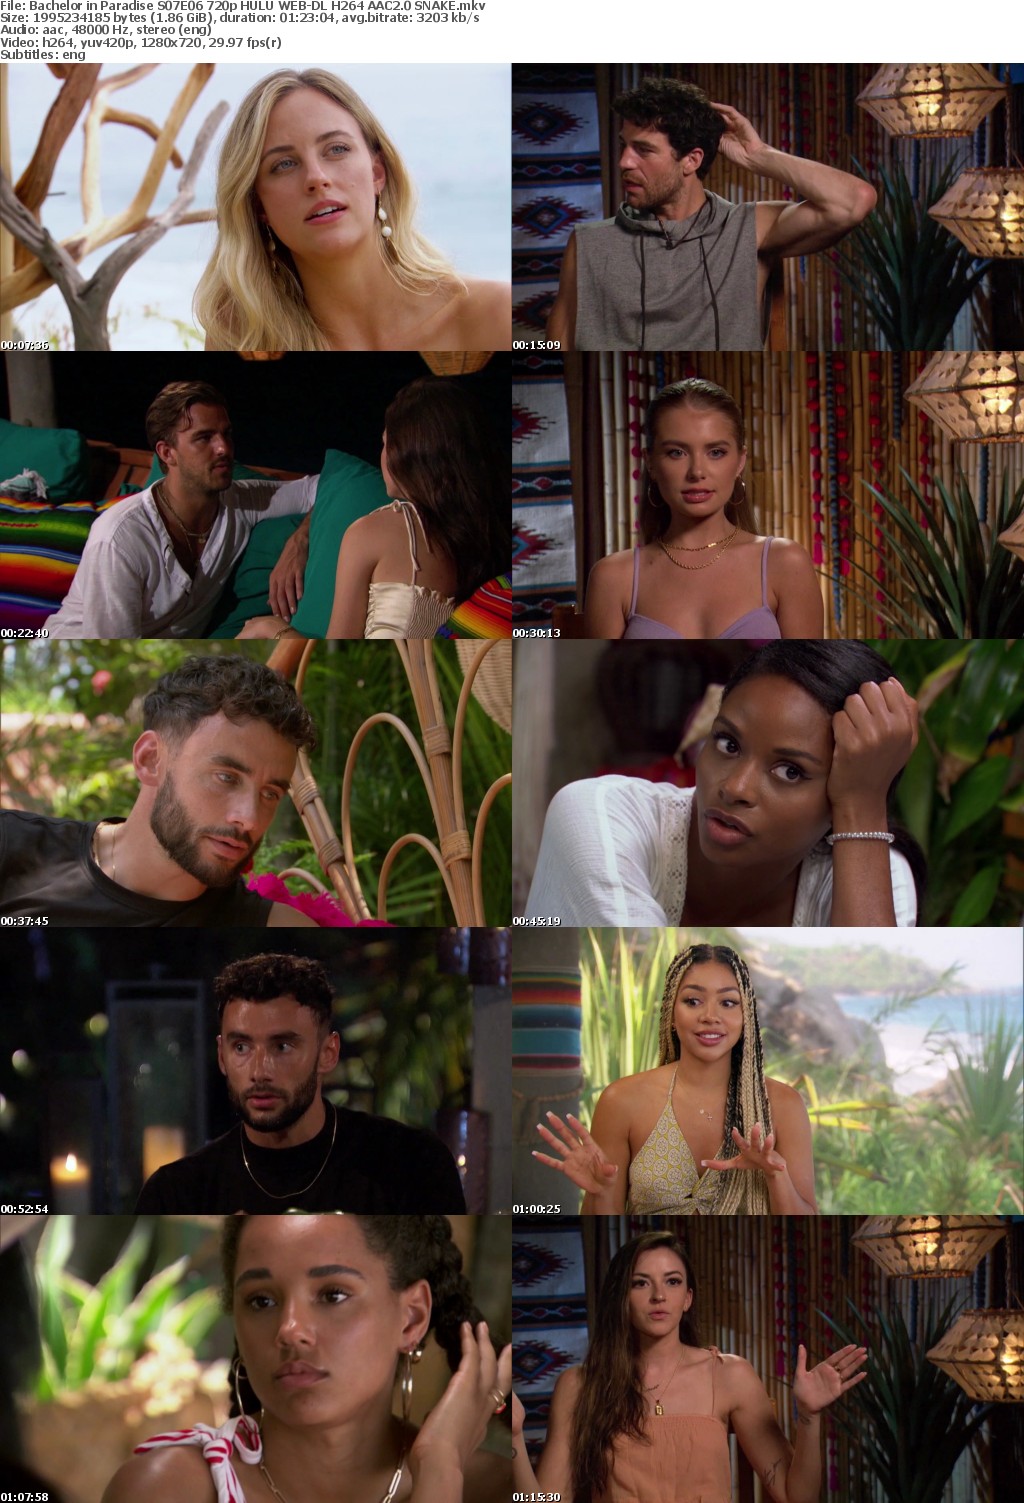 Bachelor in Paradise S07E06 720p HULU WEB-DL H264 AAC2 0 SNAKE